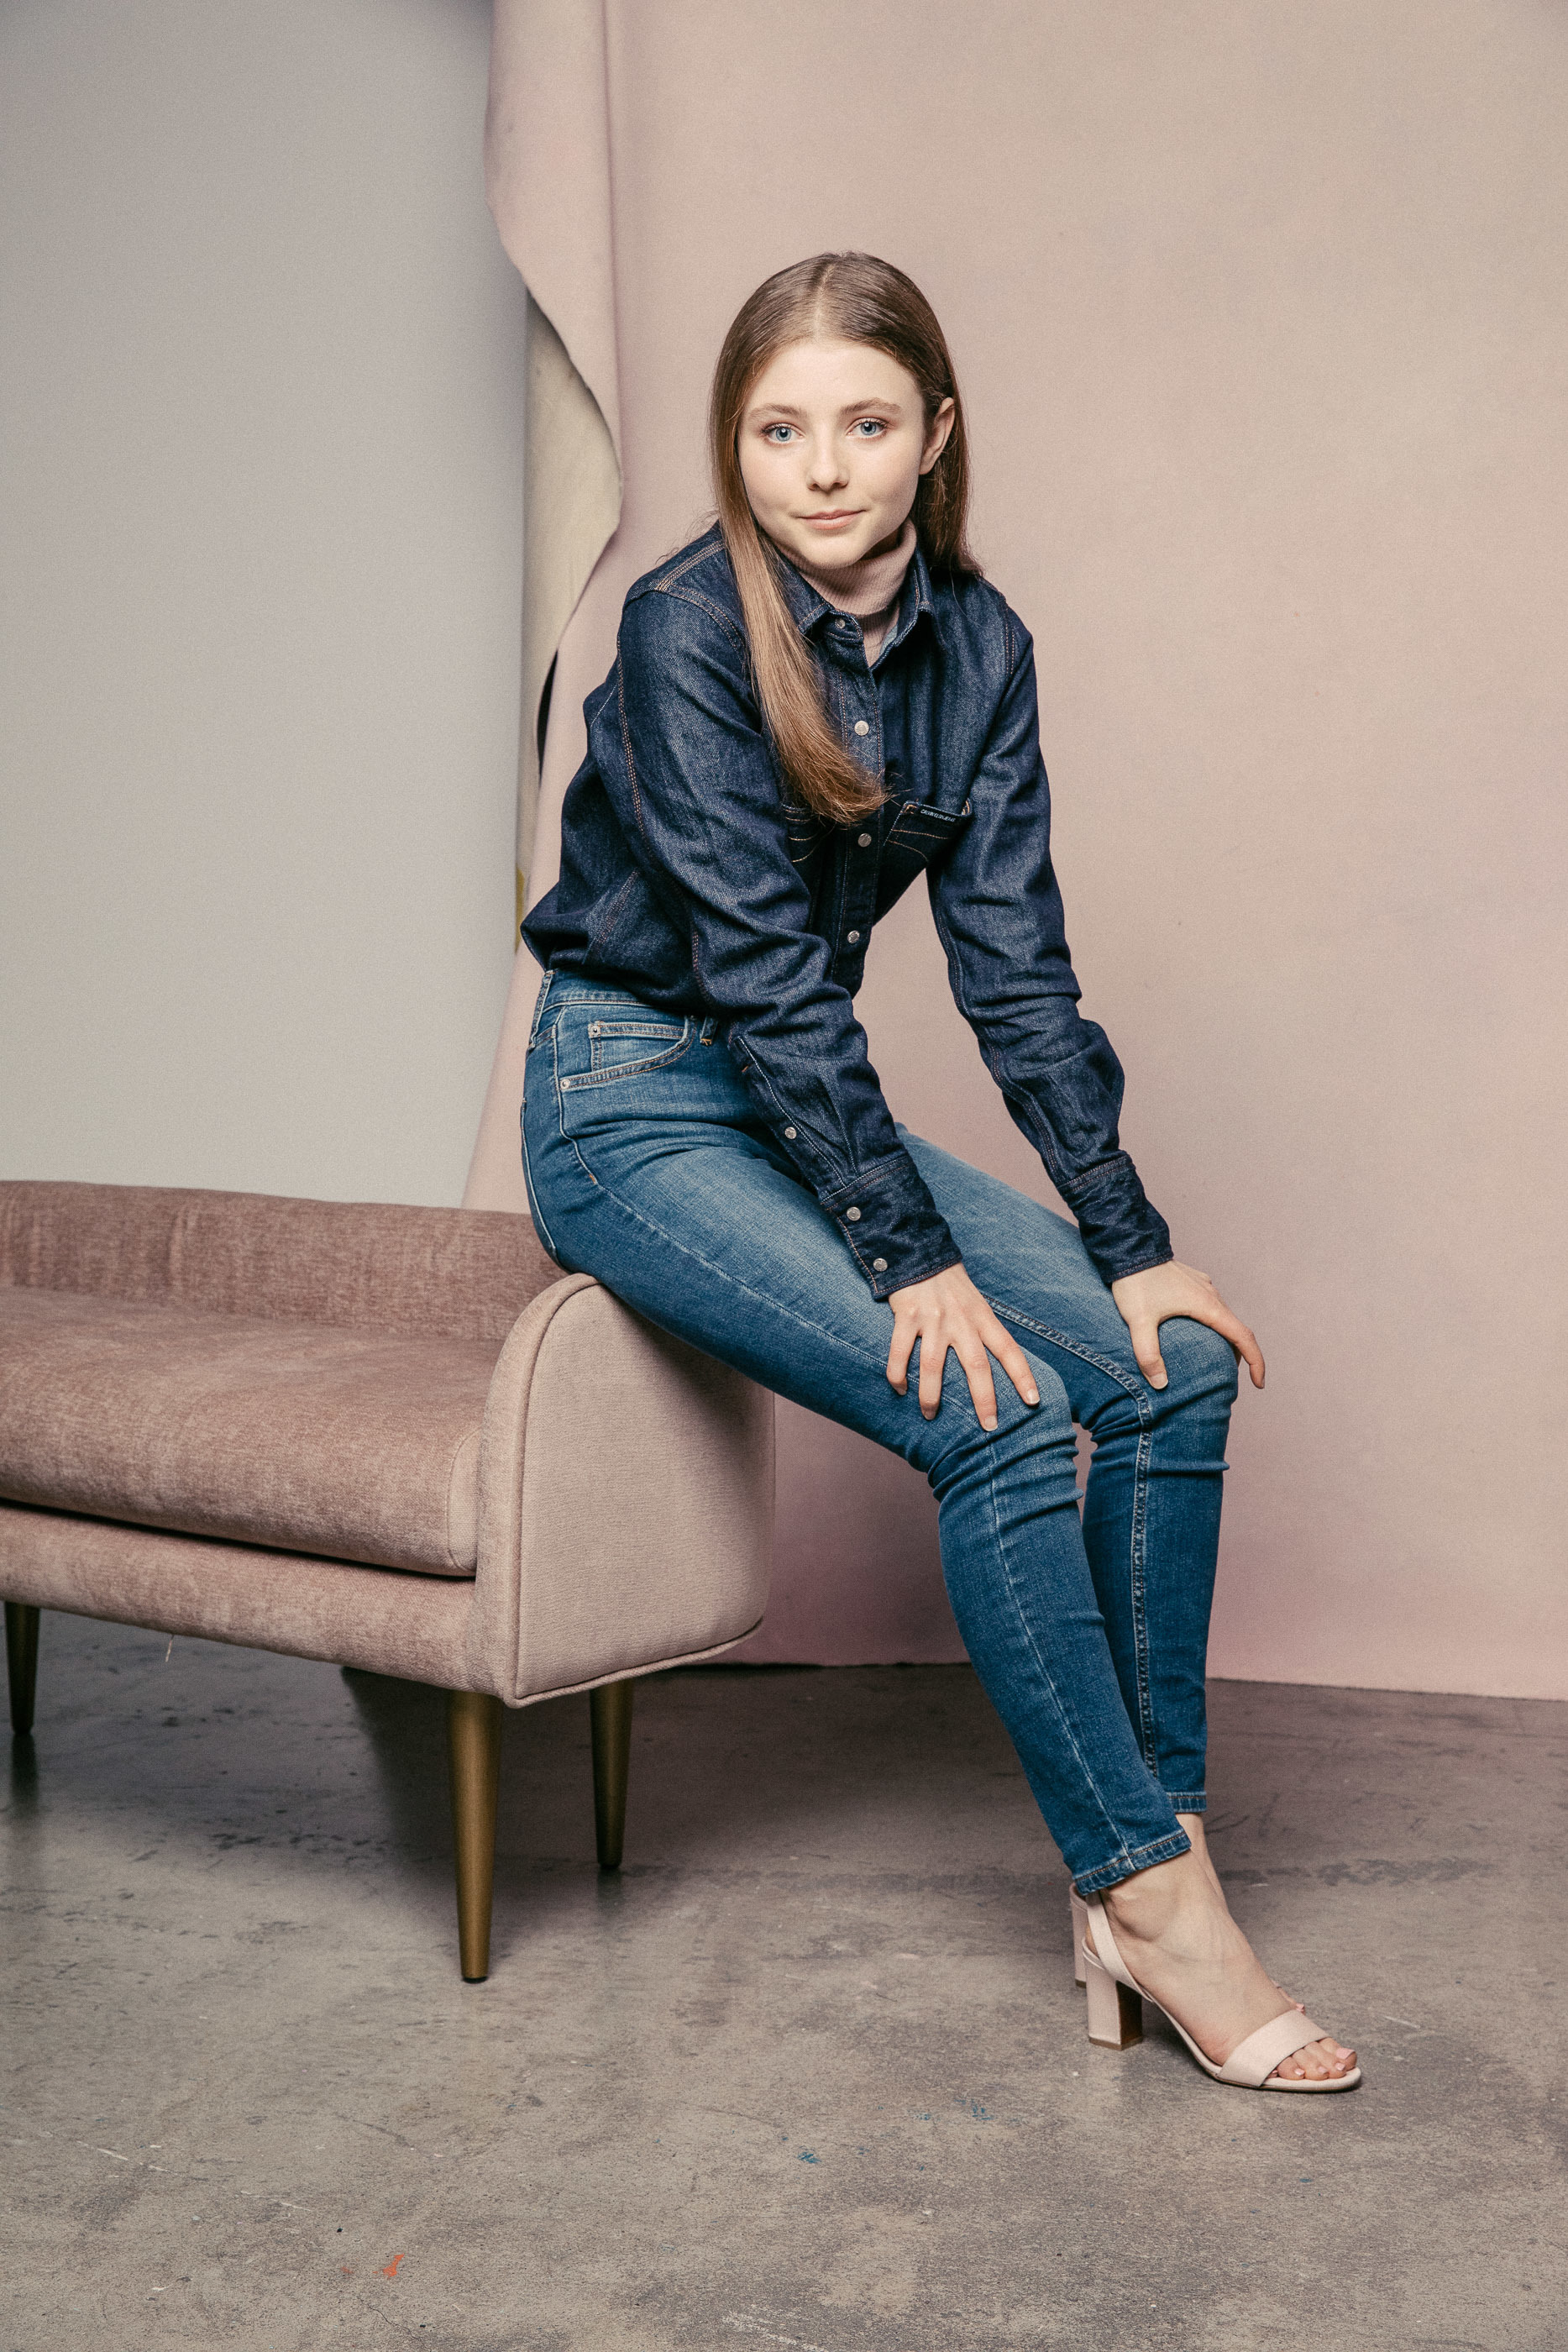 People who liked Thomasin McKenzie's feet, also liked.